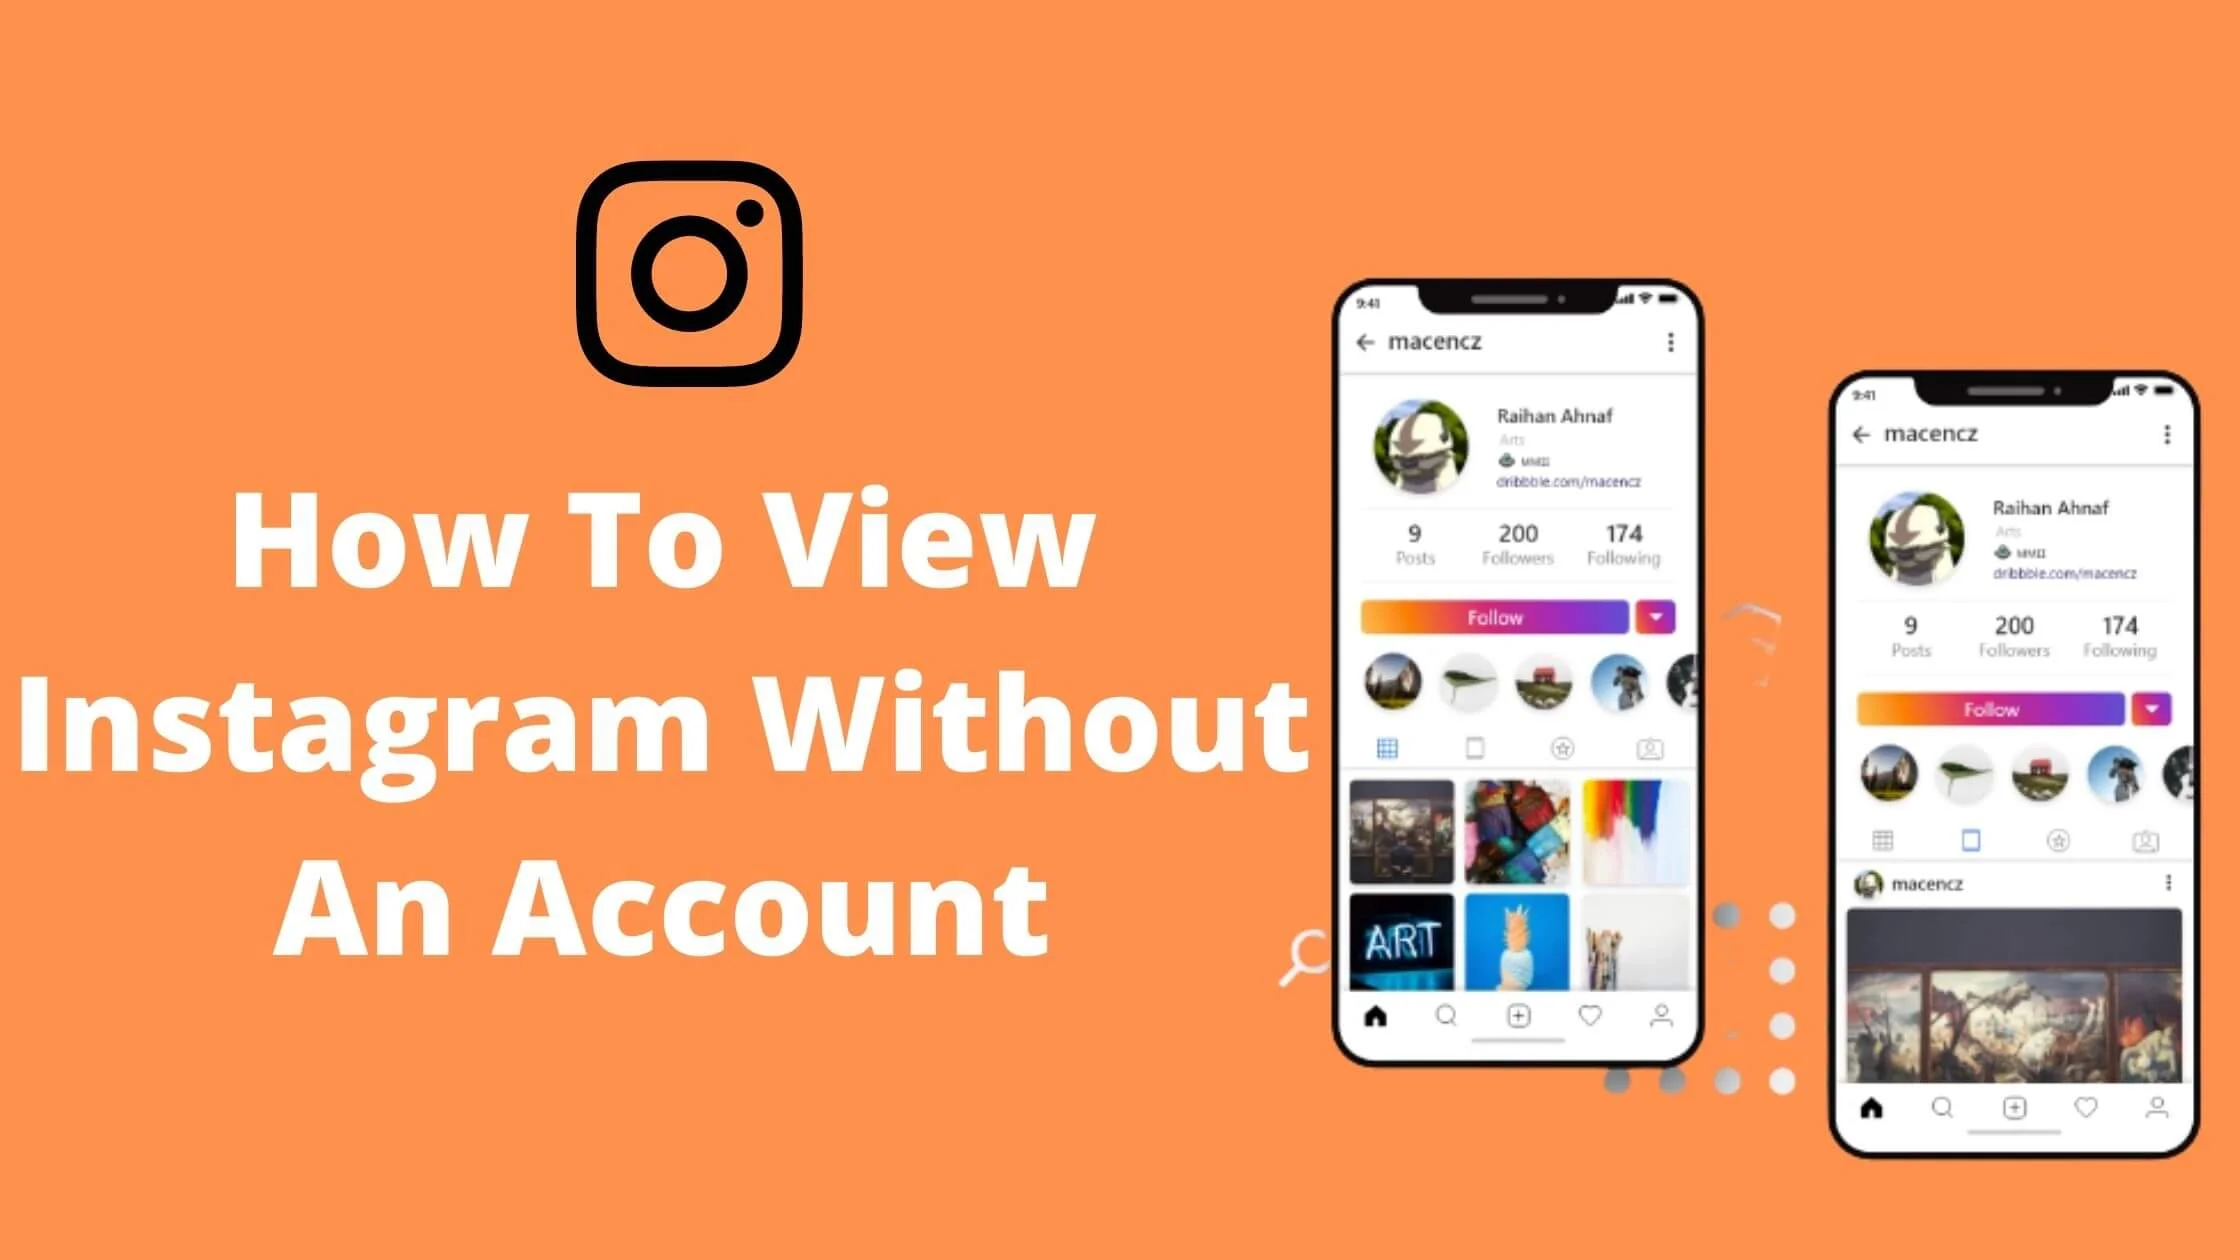 How To View Instagram Without An Account